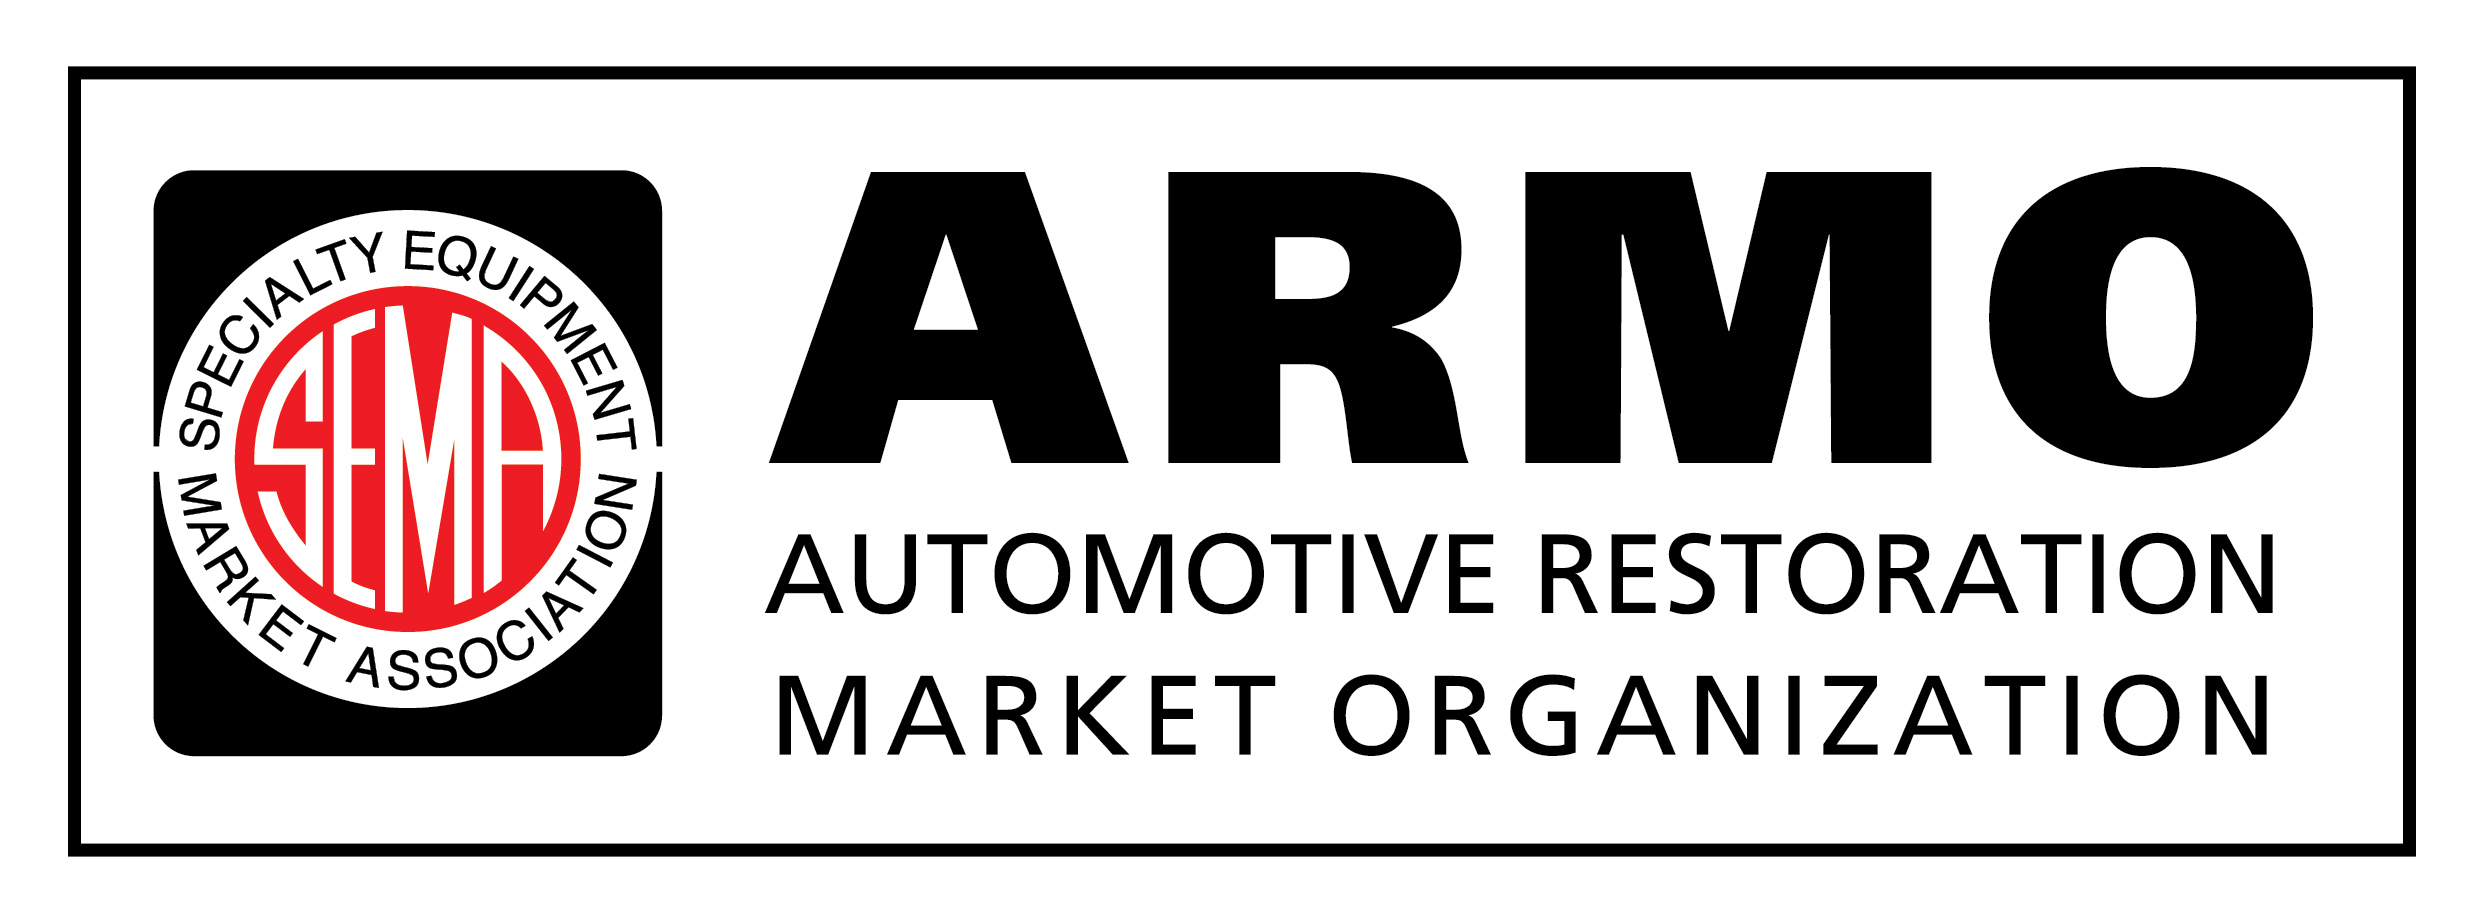 ARMO Membership Meeting to Cover Supply Chain Issues | THE SHOP